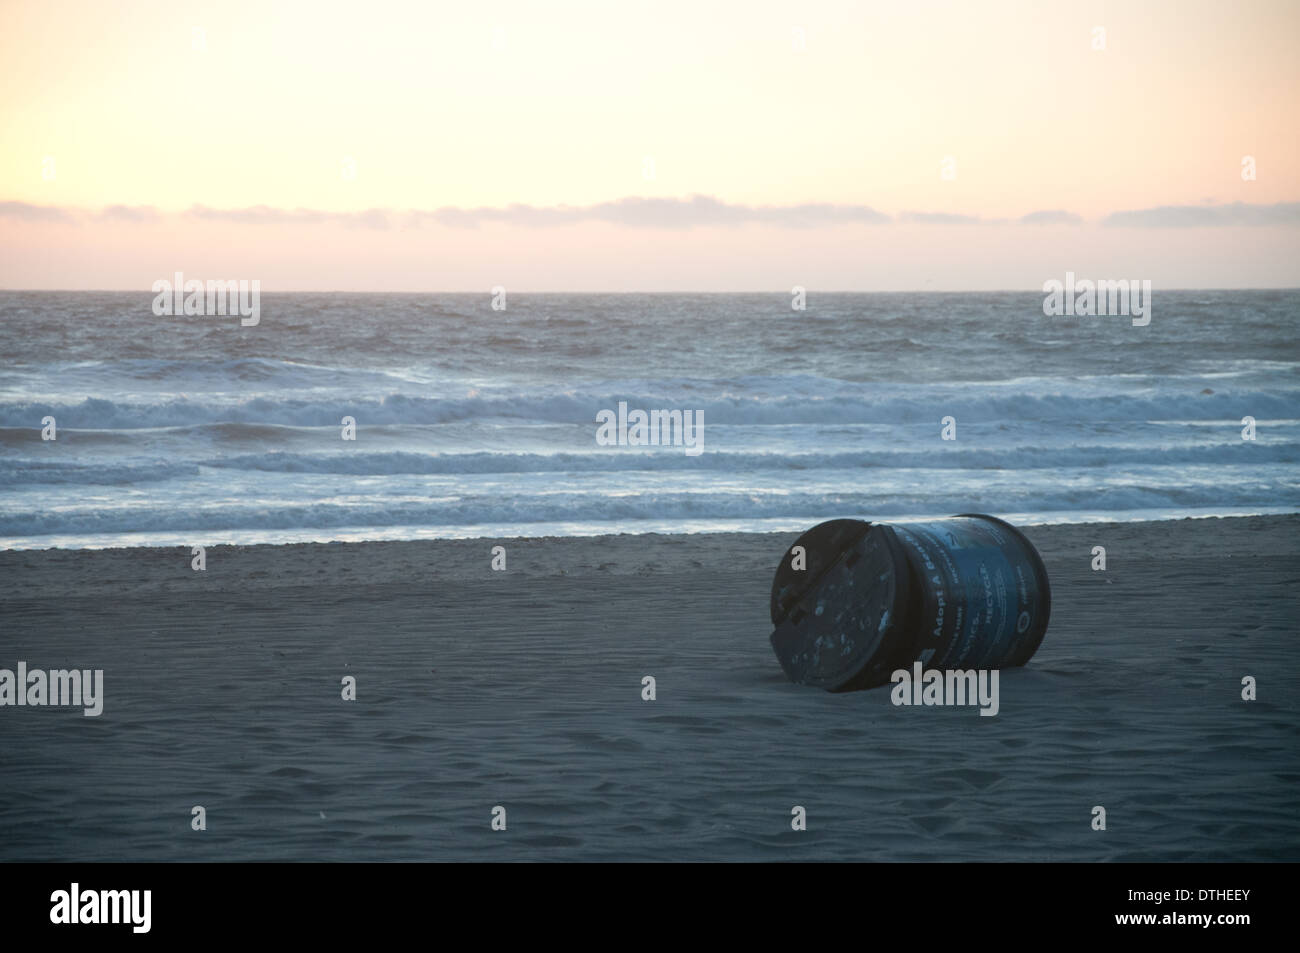 An empty metal drum on the beach at sunset Stock Photo